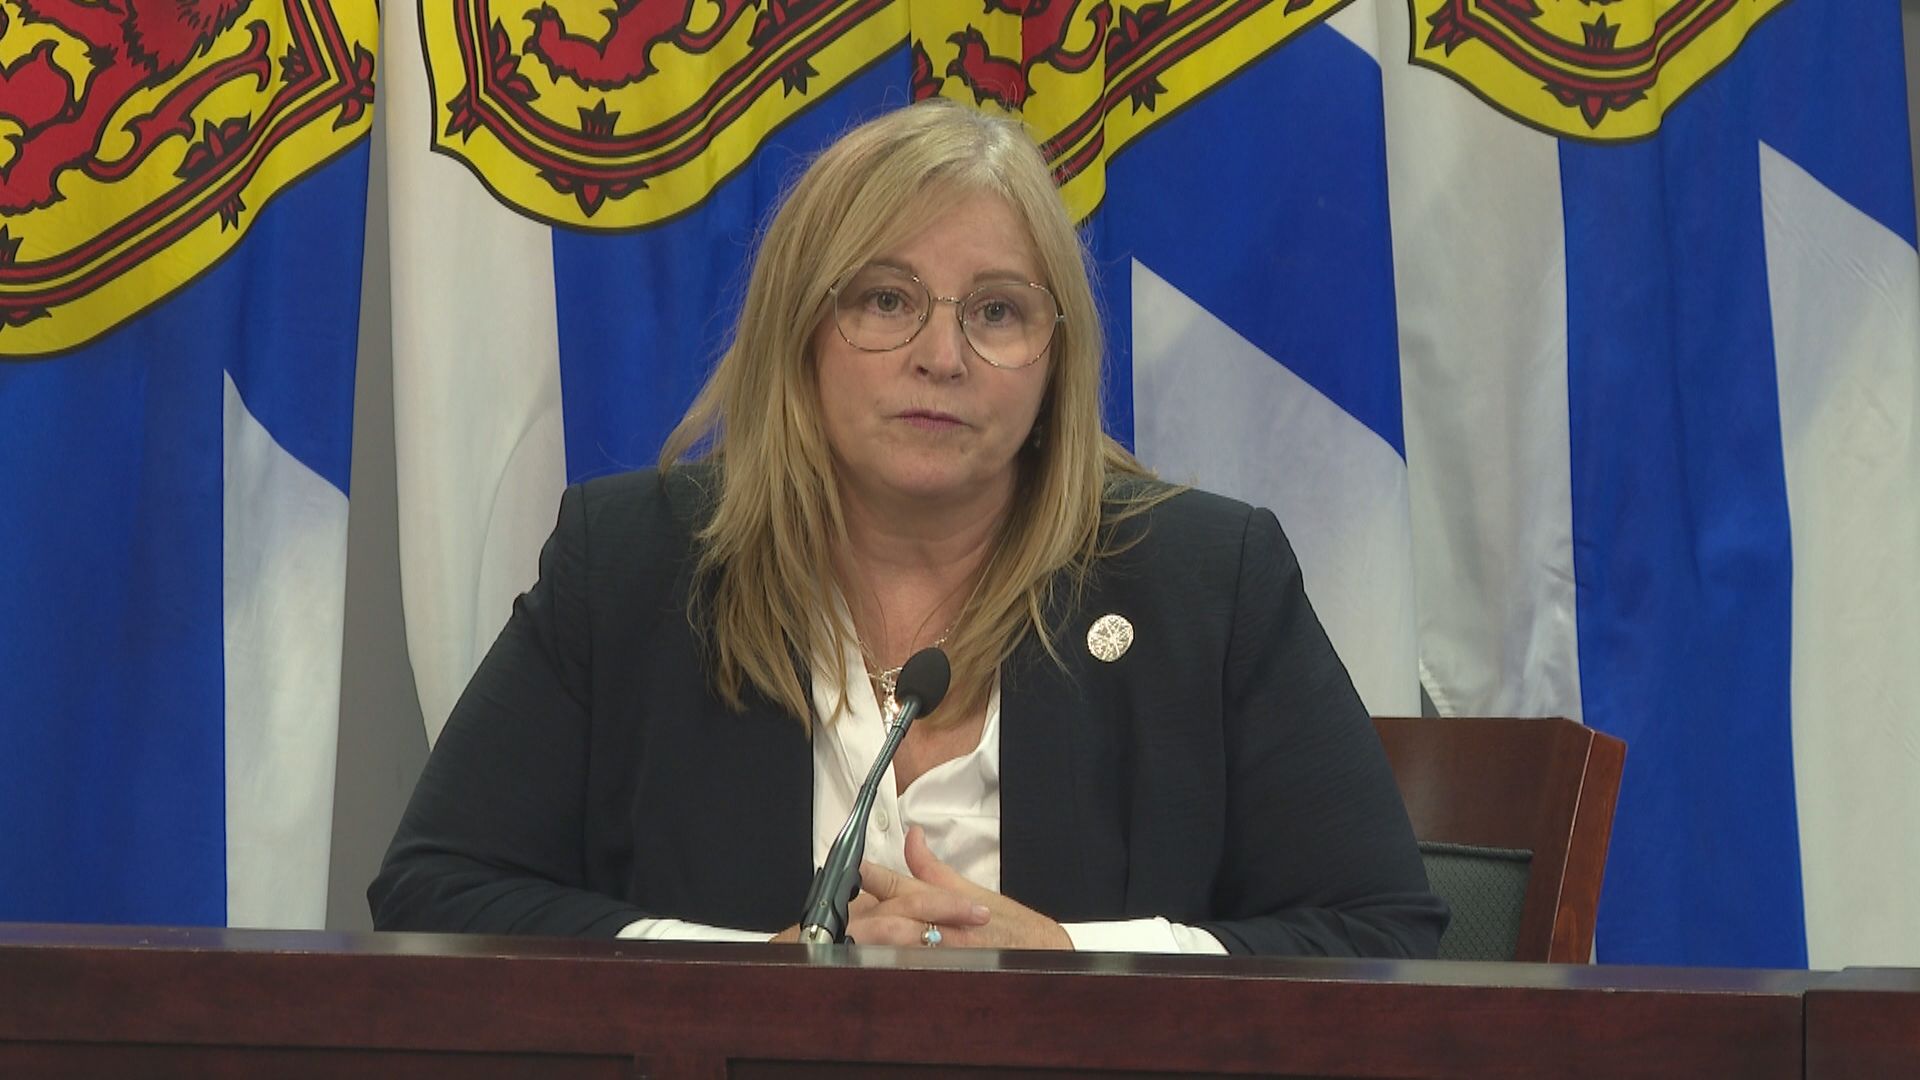 Date set for Pictou West by-election following retirement of Karla MacFarlane